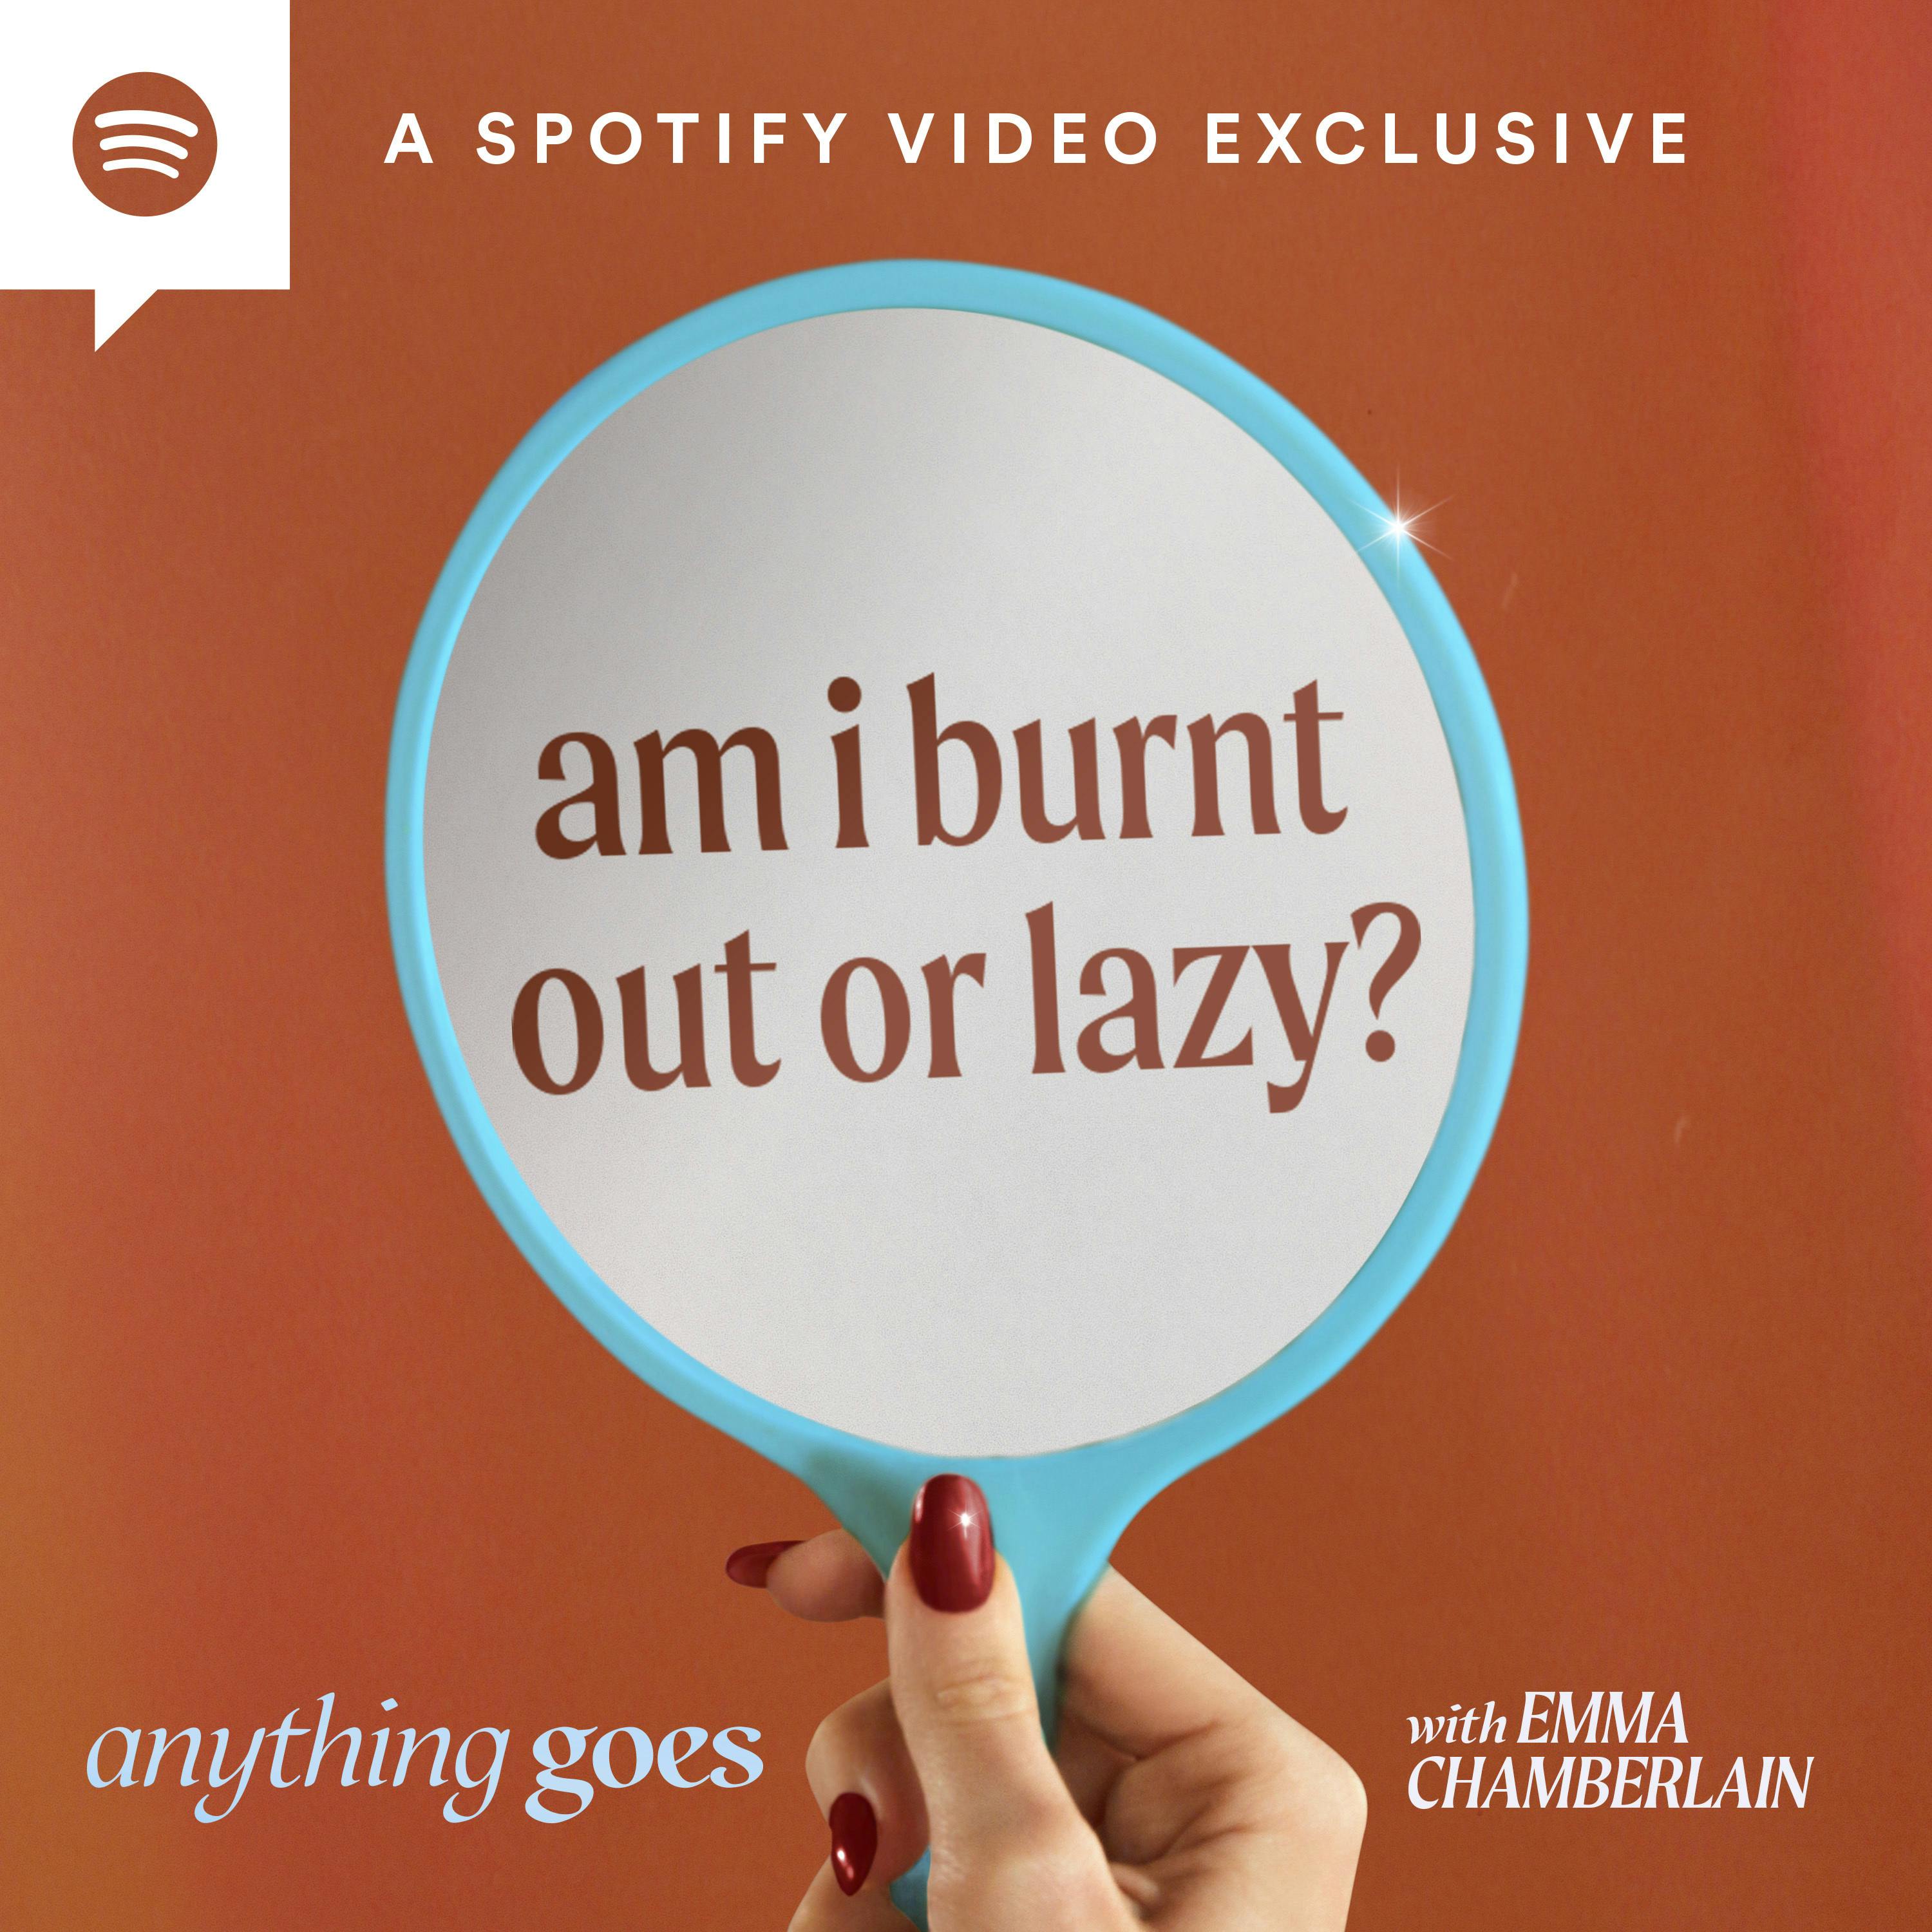 am i burnt out or lazy? [video]